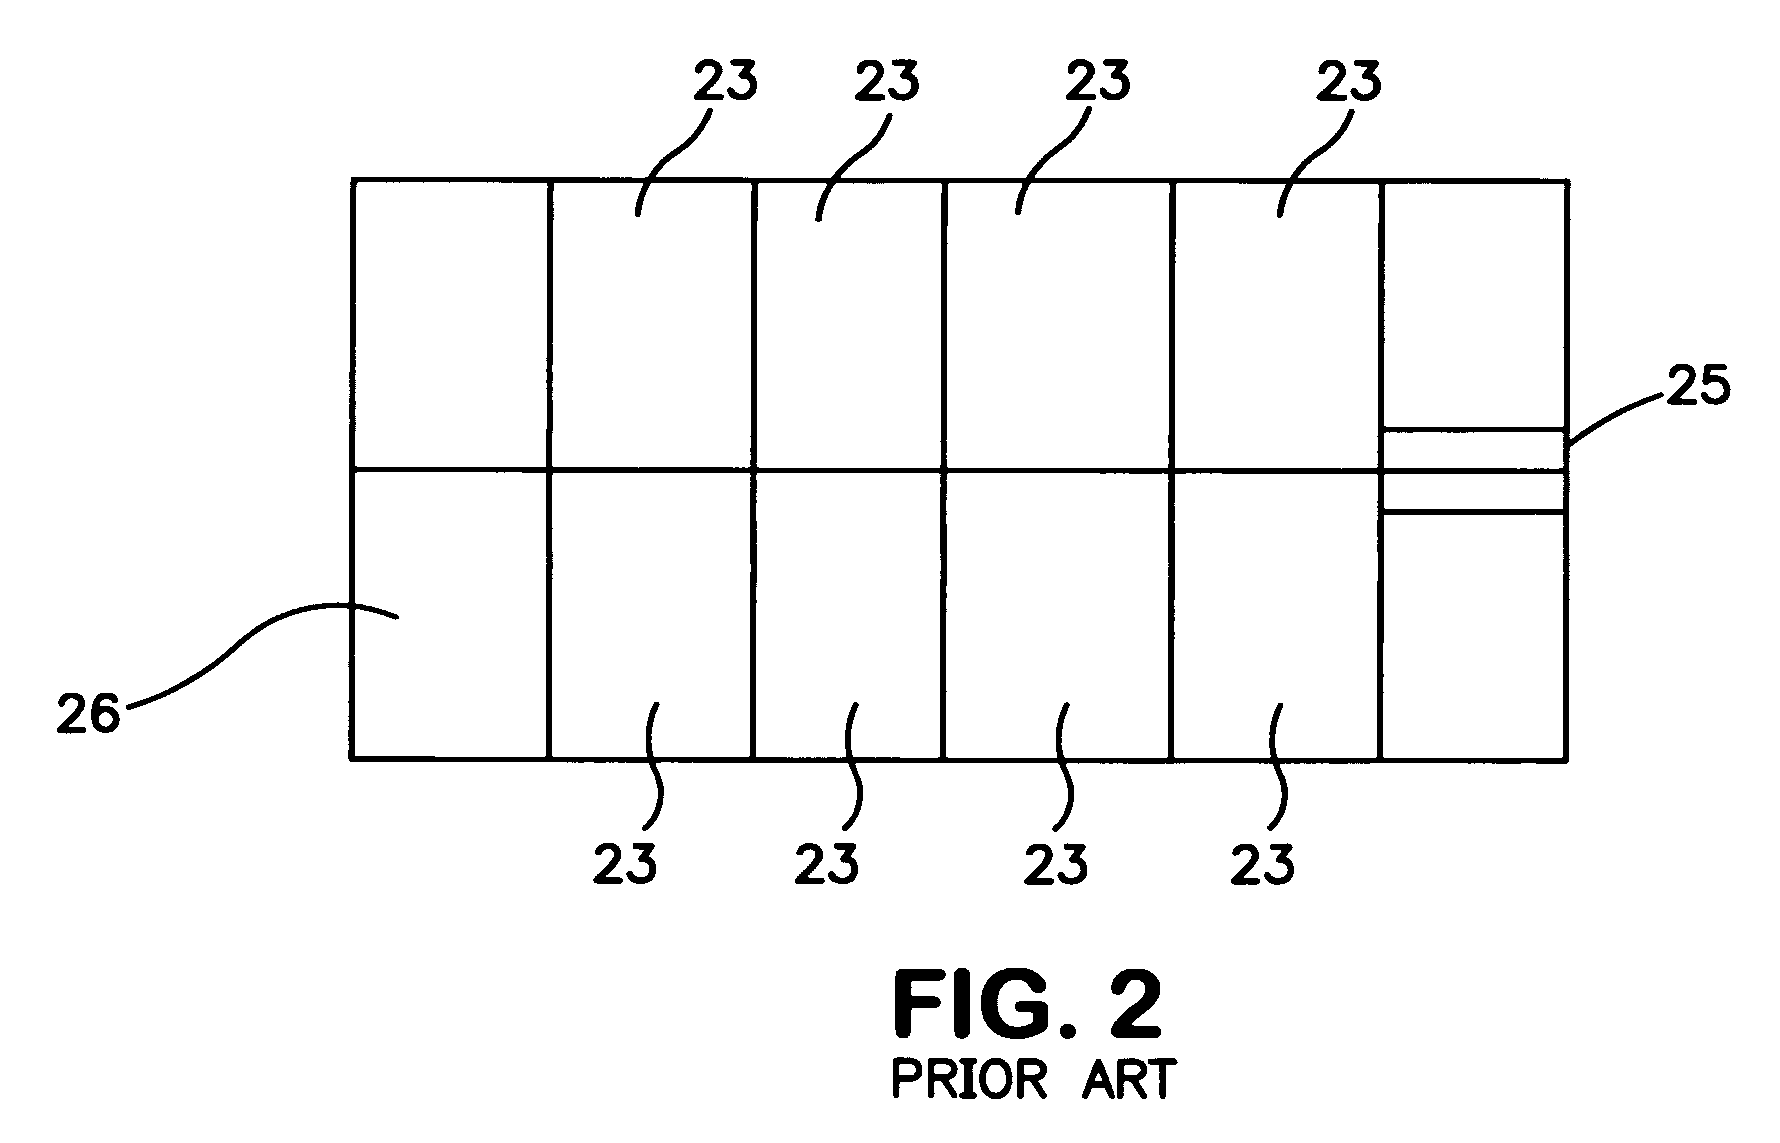 Apparatus and methods for transporting and processing substrates